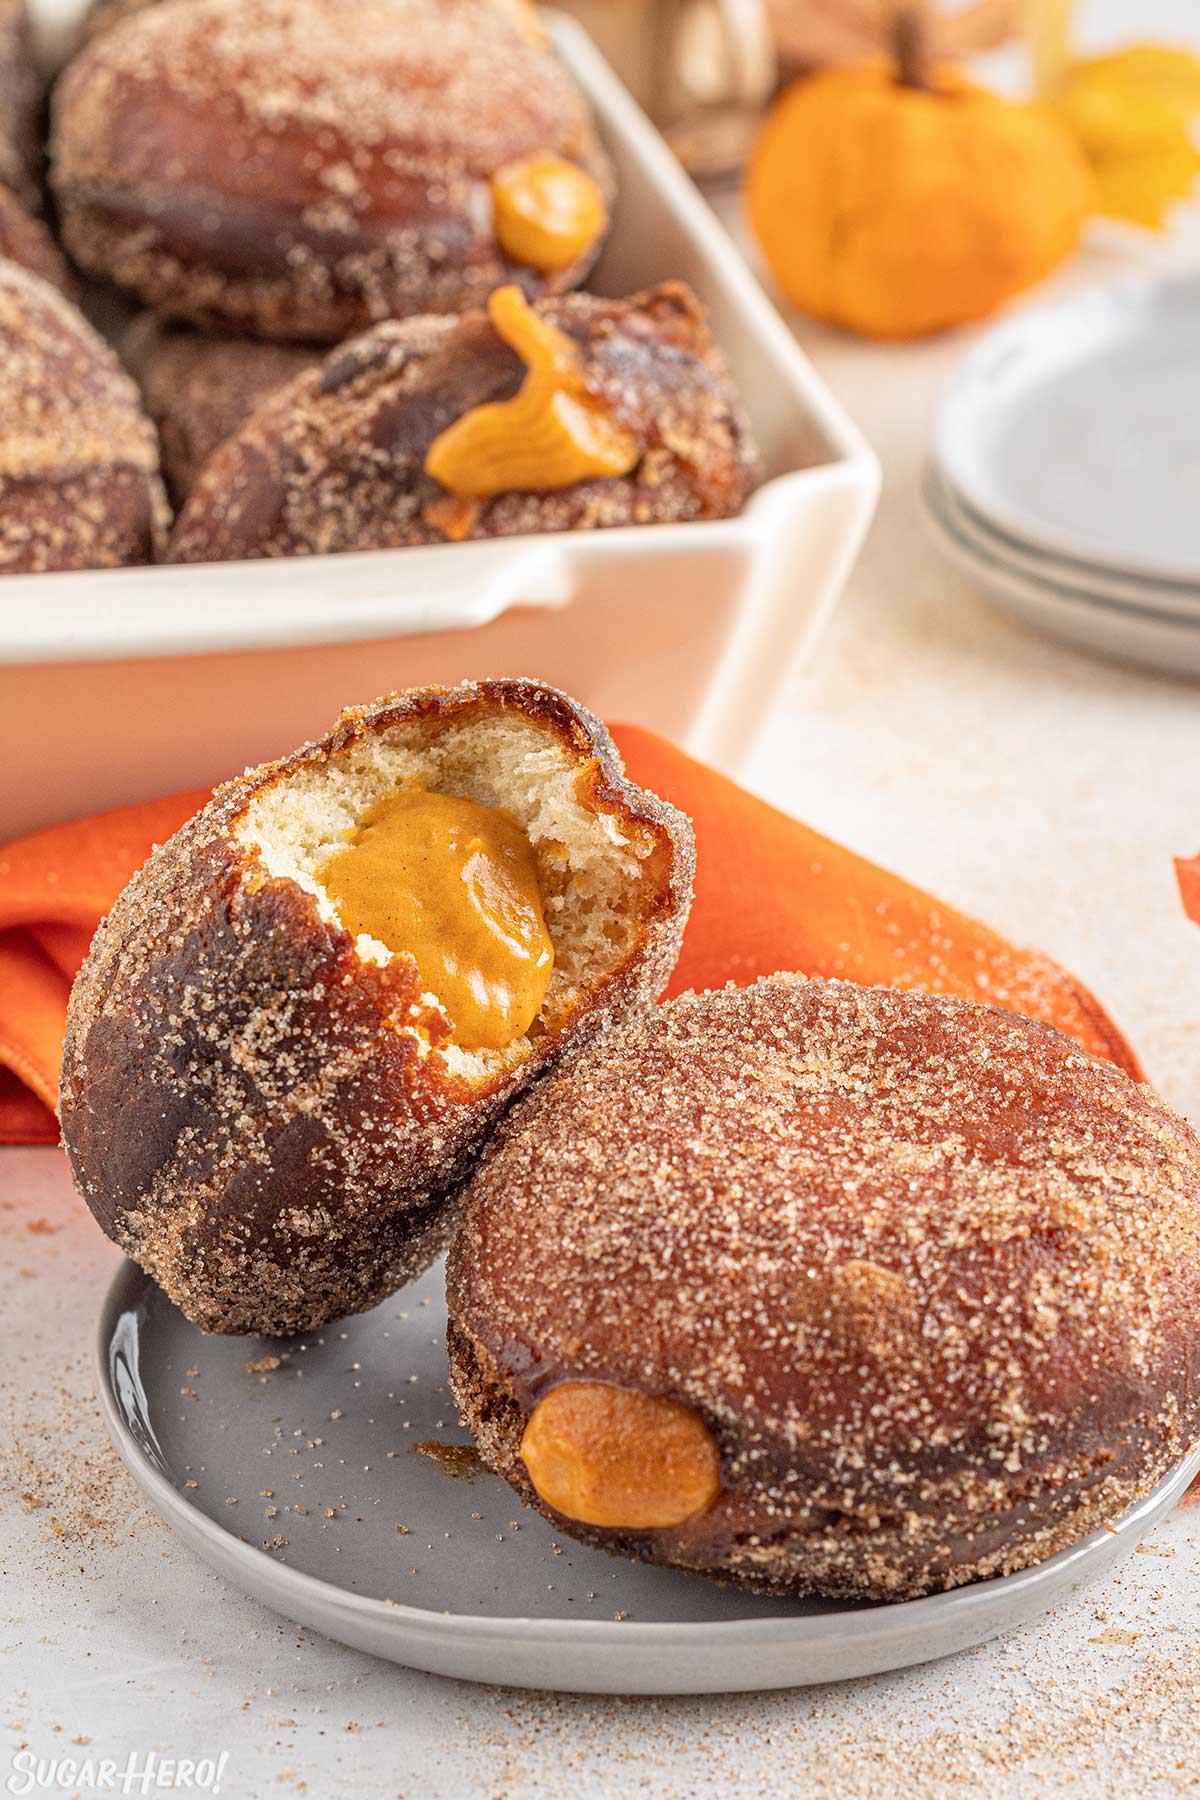 2 Pumpkin Cream Filled Donuts on a small gray plate with one leaning against the other and a bite removed from one to show the pumpkin filling.